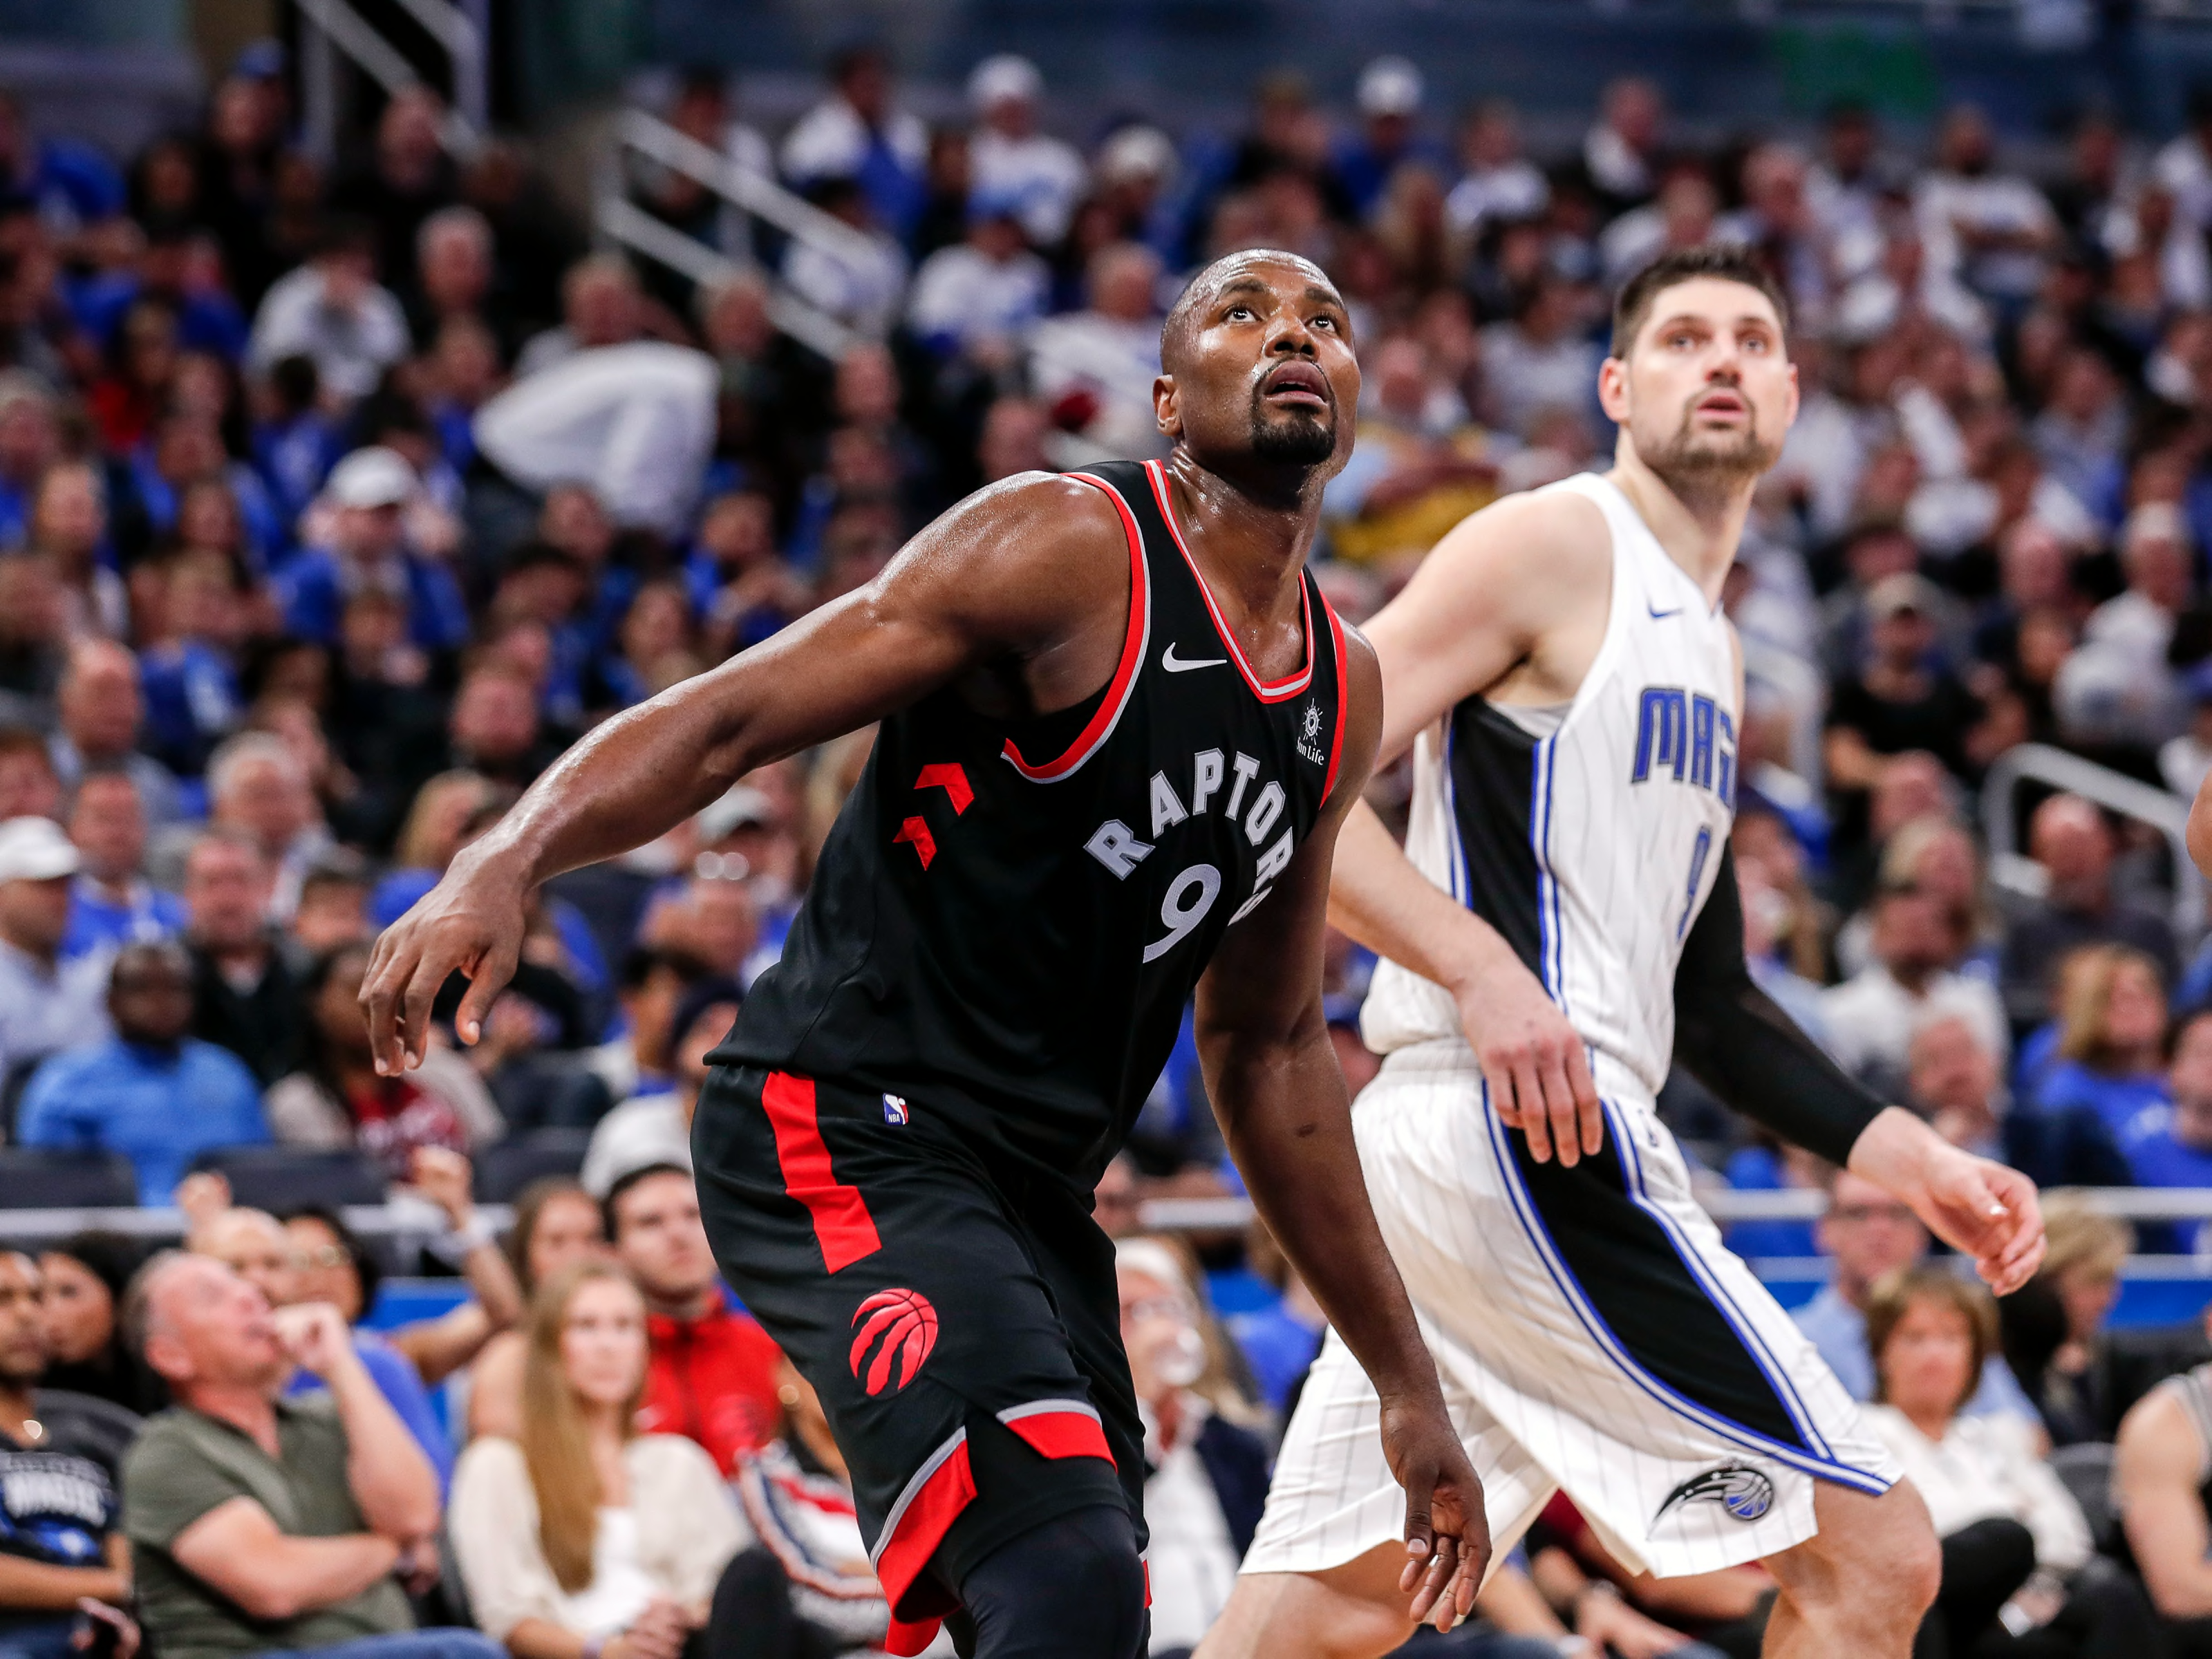 Did Espn Rank The Toronto Raptors Correctly In Their Top 100